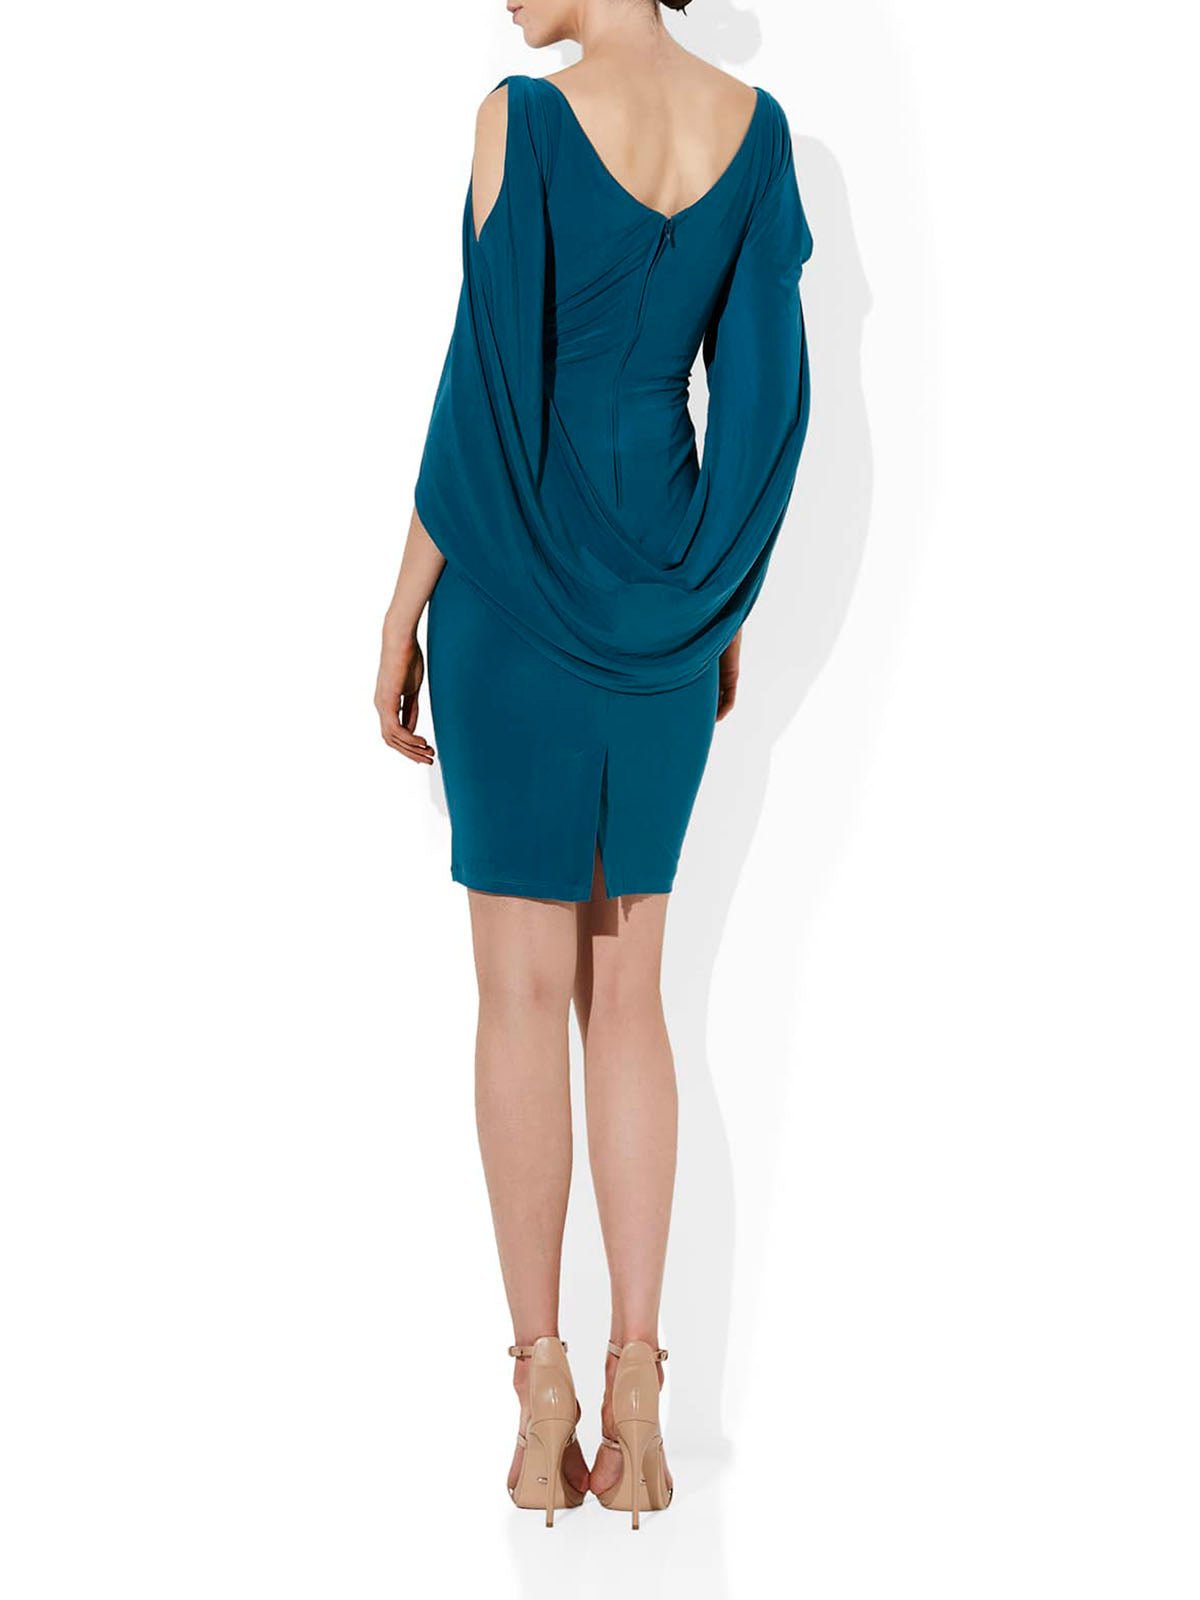 Lucia Emerald Dress by Montique